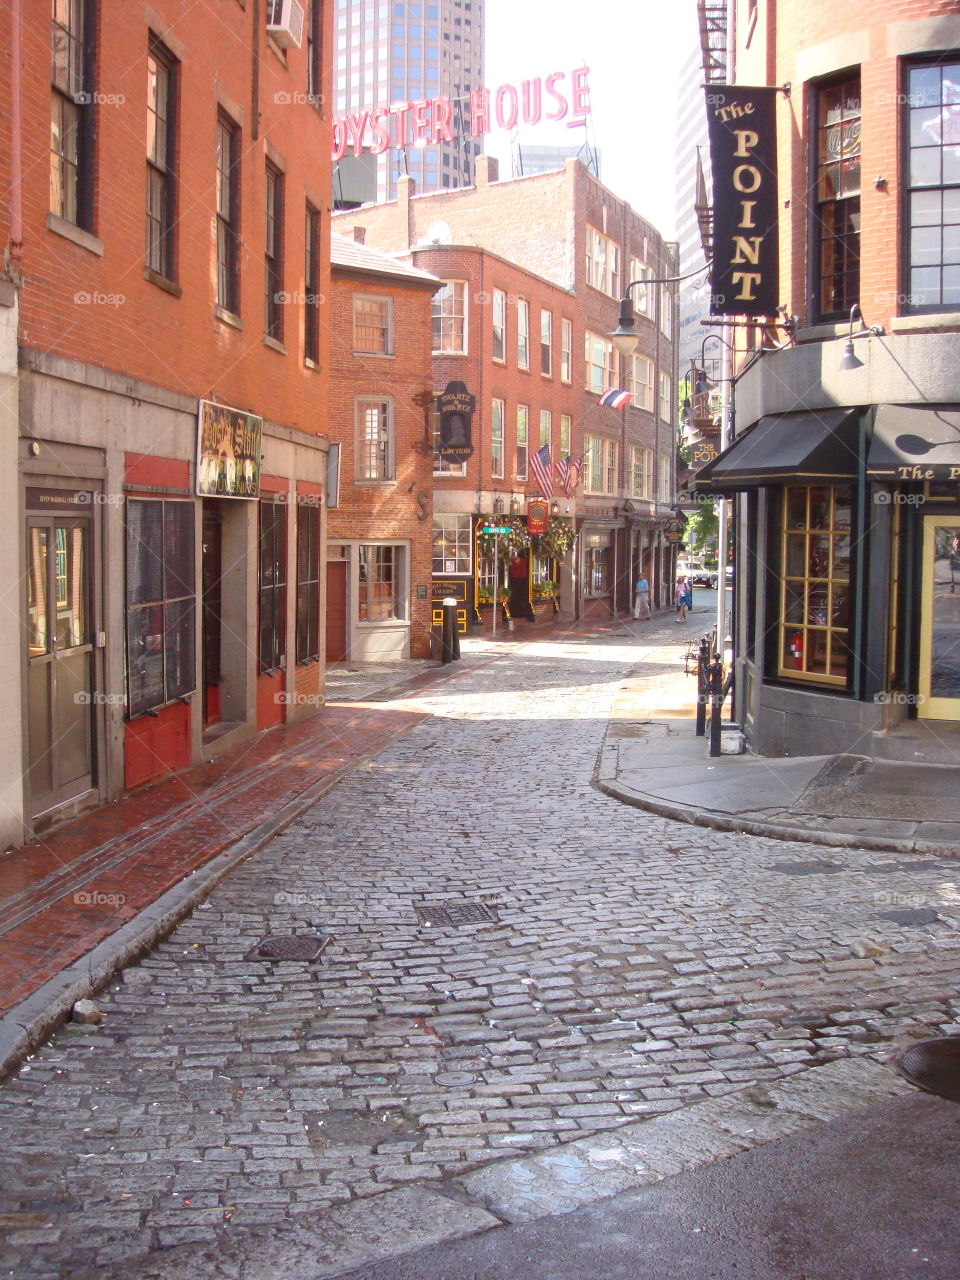 The Old Streets of Boston